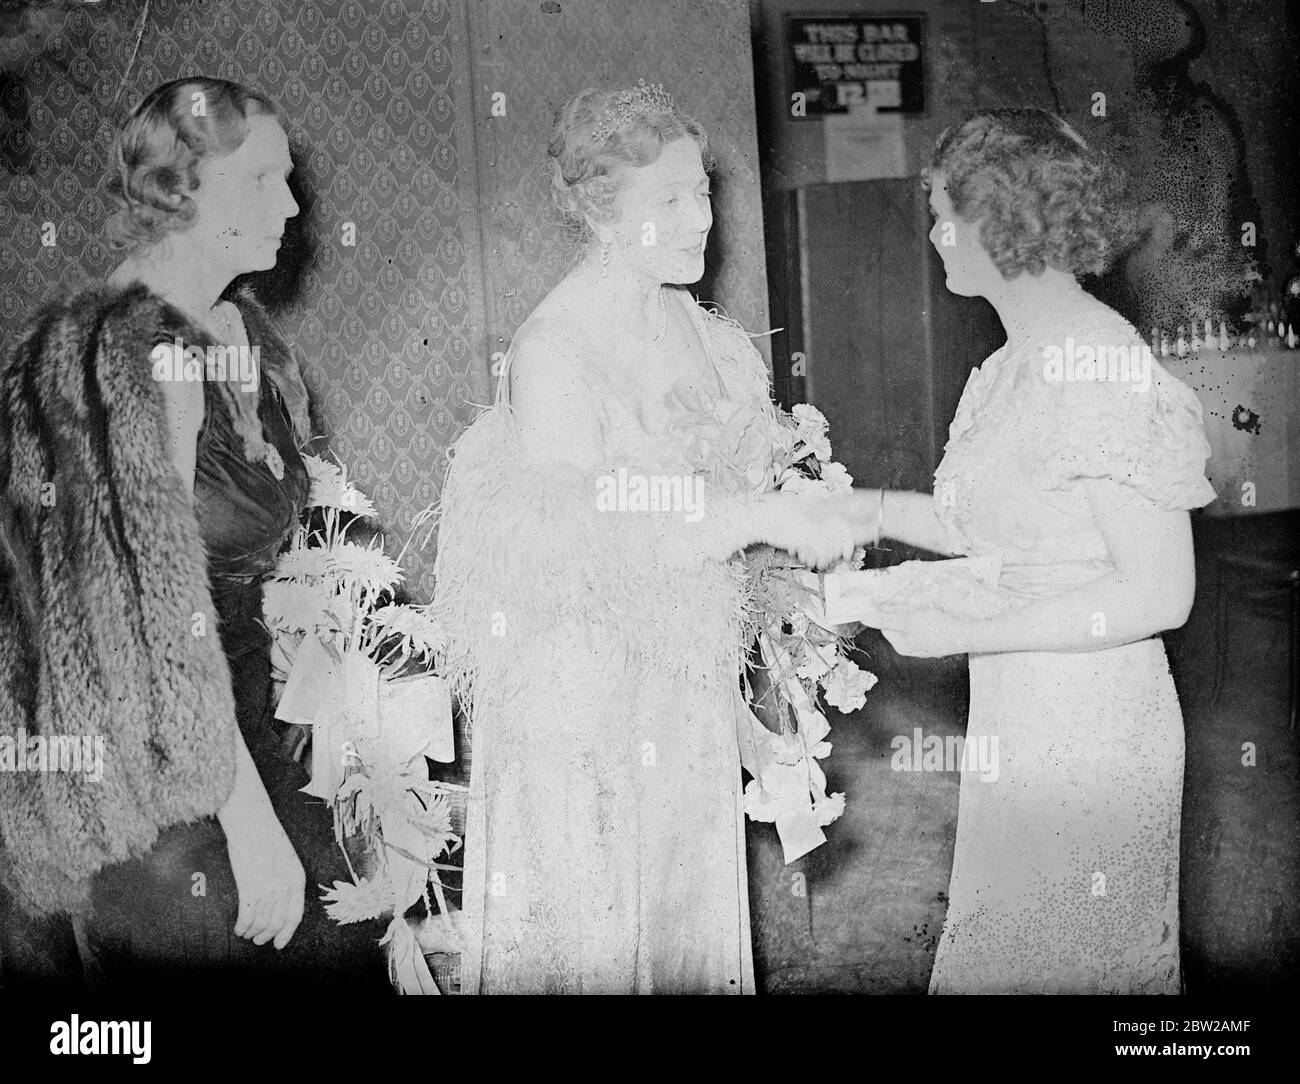 Premier's wife receives guests at London Conservatives gigantic Christmas party. Miss Neville Chamberlain, wife of the Premier acted as hostess to 2000 guests who attended the London Conservatives Christmas party at the horticultural Hall, Westminster, London. In this party, new to London. Conservatism, famous sportsmen and film actors helped to run a funfair. Funds raised will be used to help poorer constituencies. But the shows, Mrs Neville Chamberlain, receiving a guest at the party. On left is the Lady Lucas Tooth (chairman of the party committee). 8 December 1937 Stock Photo